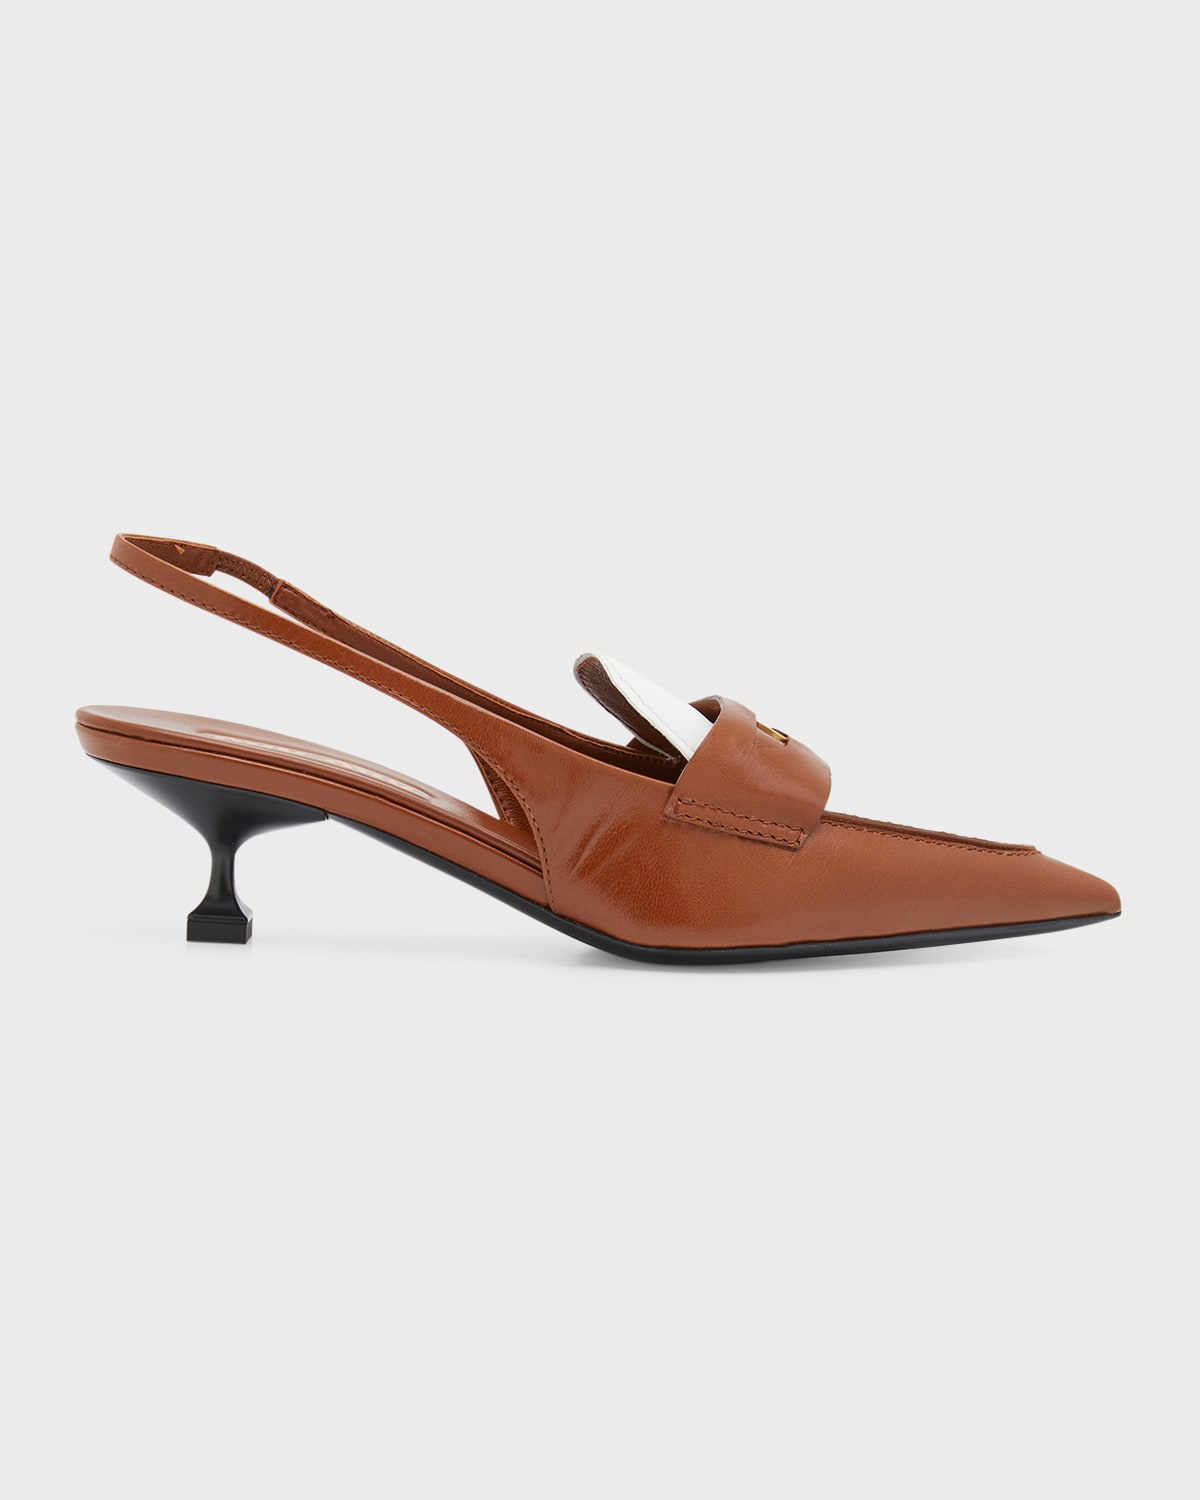 Miu Miu Leather Coin Penny Loafer Slingback Pumps In Cognacbia